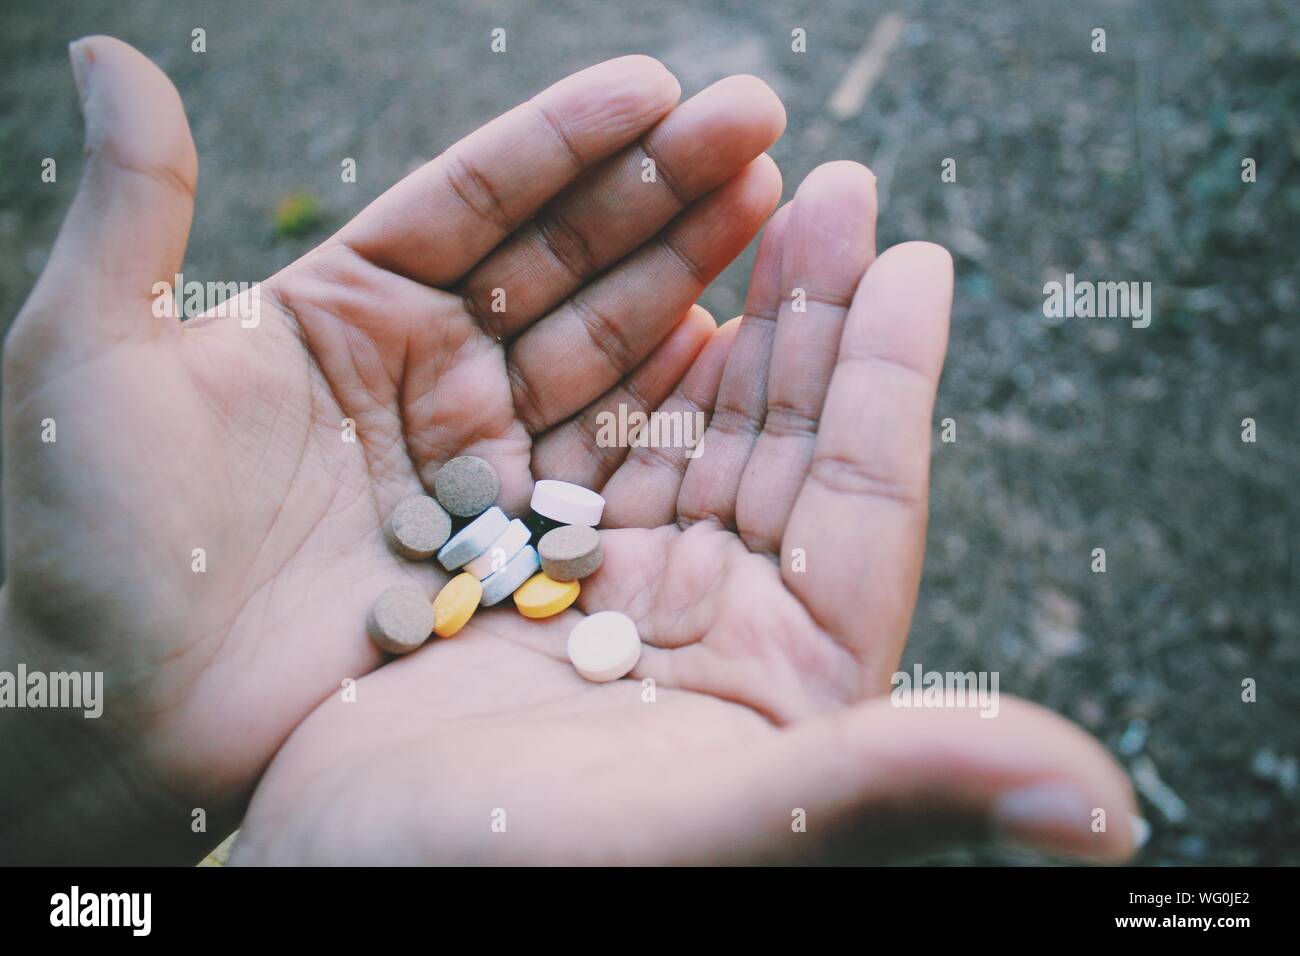 Cropped Image Of Hands With Medicines Stock Photo